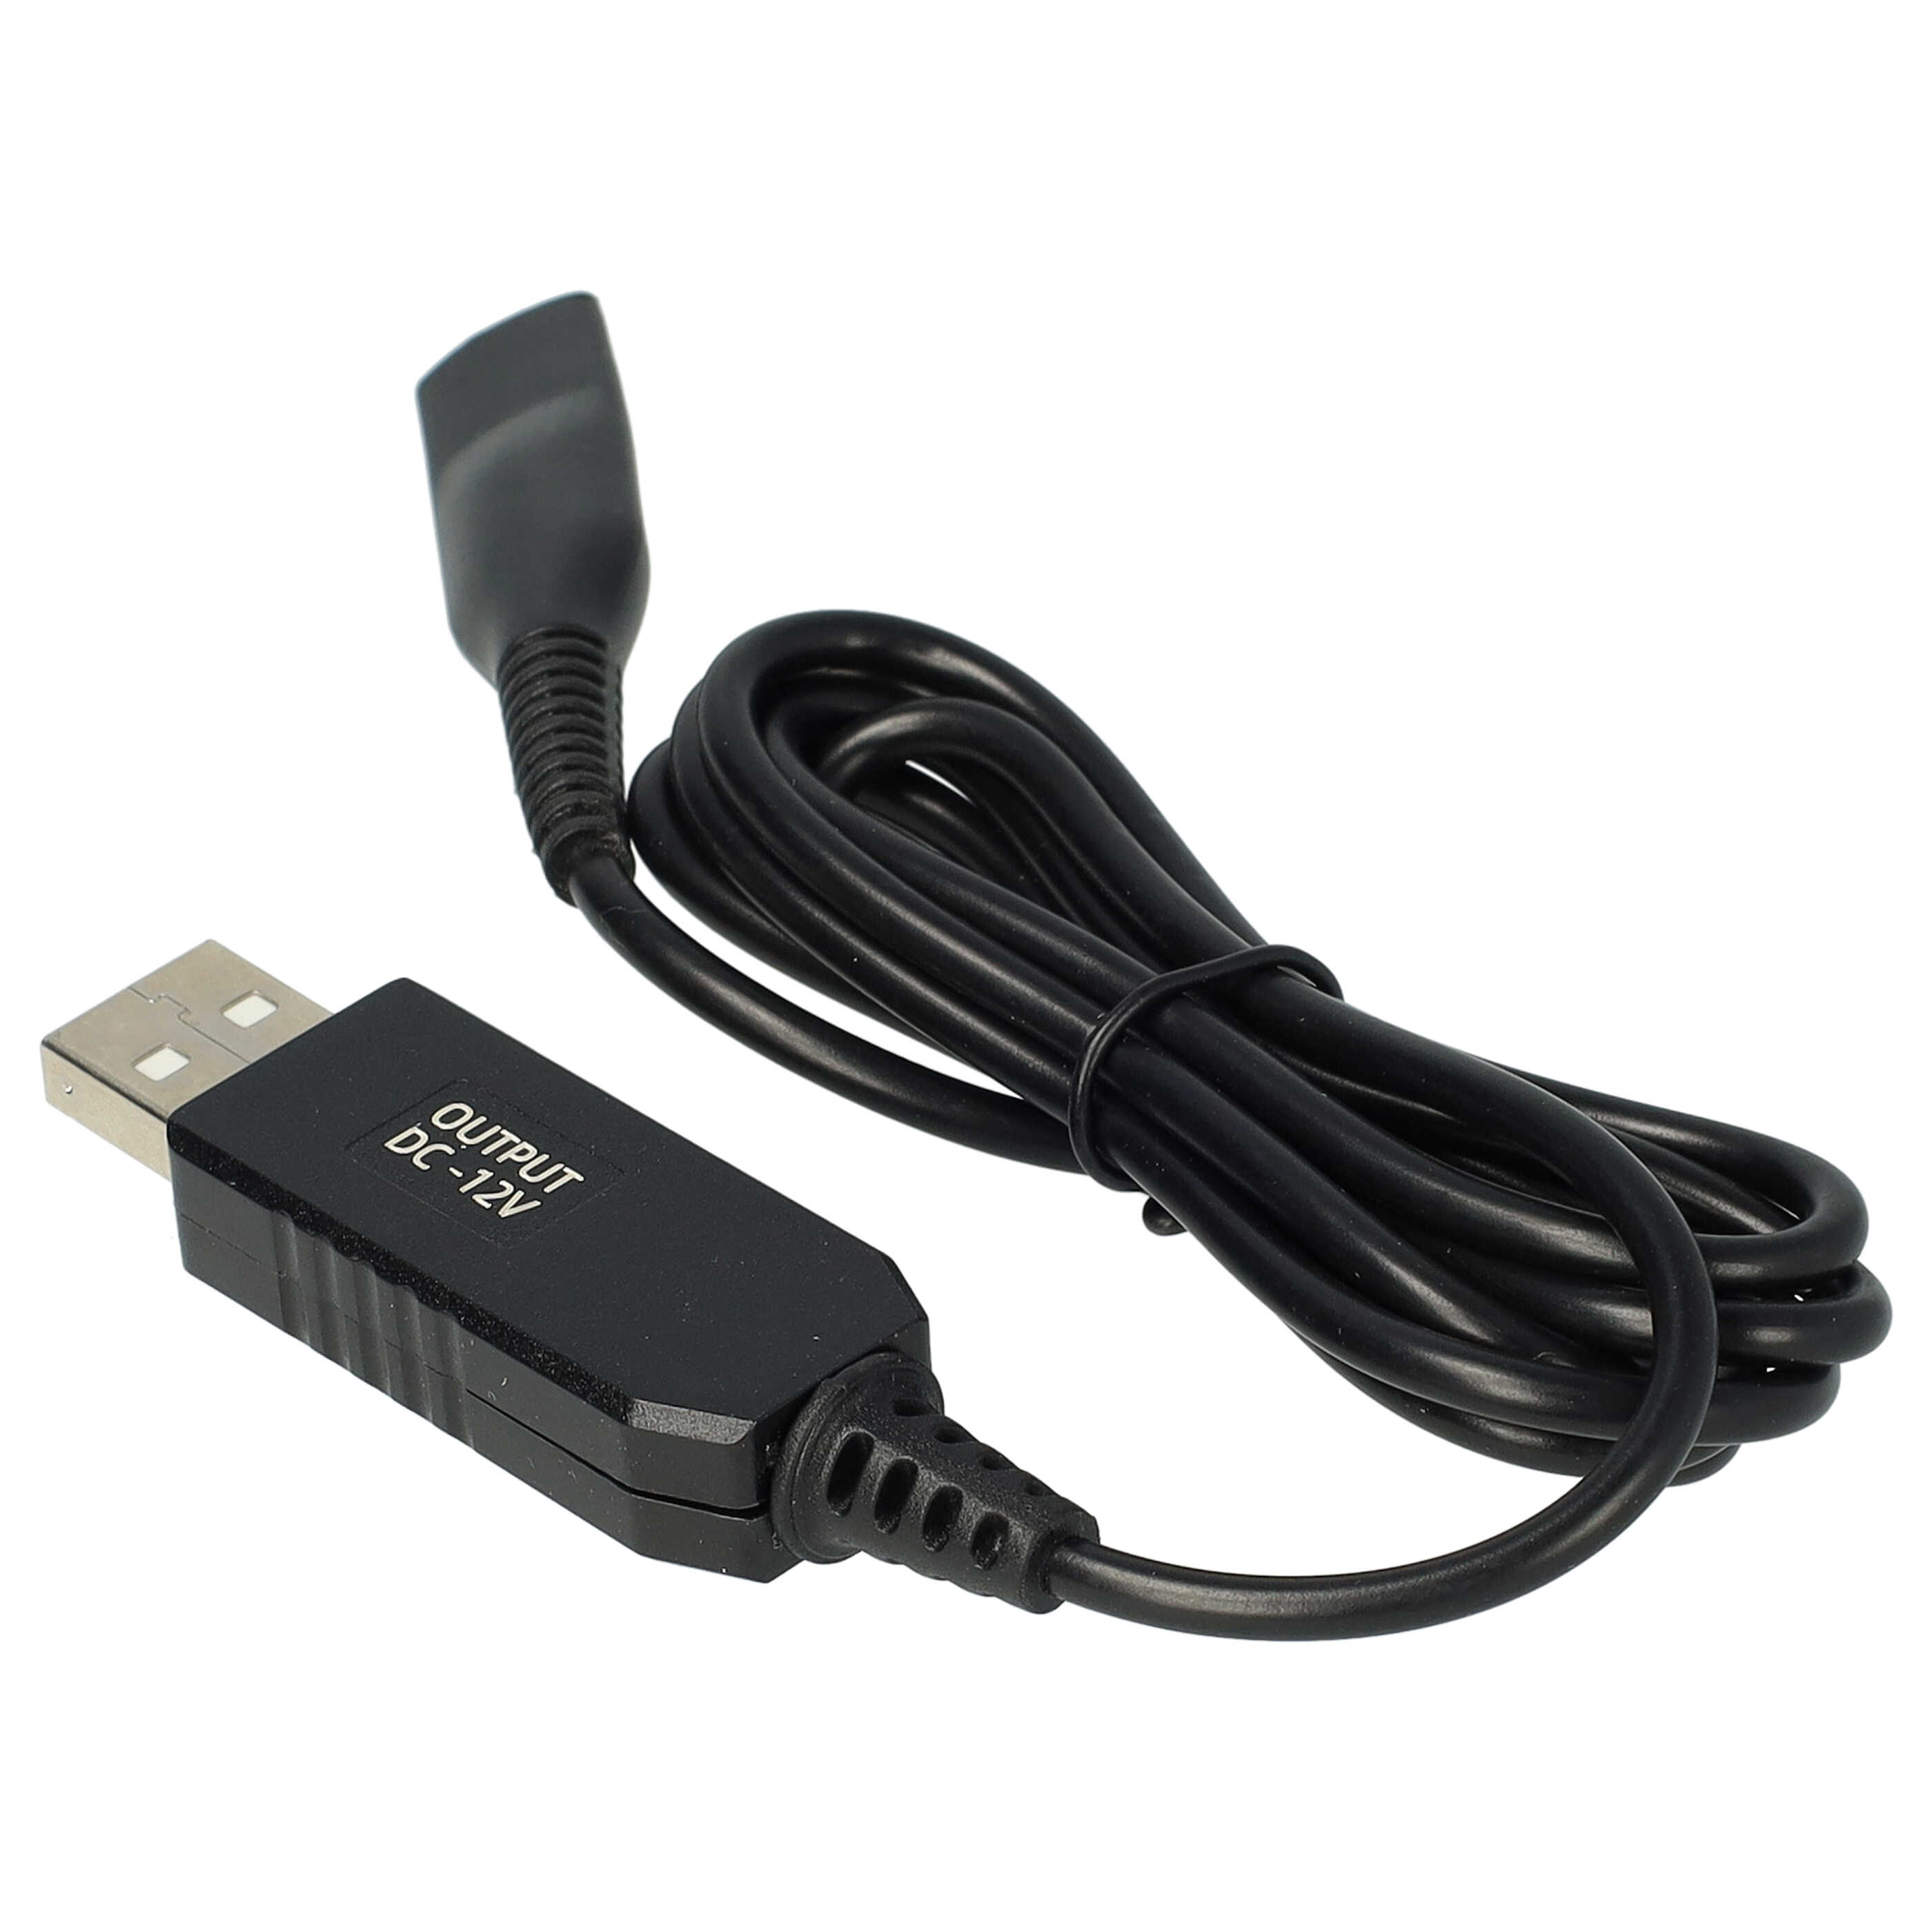 Replacement Charger Cord for Braun Model 9565 9566 9781 9782 9595 9795 9785  9581 9585 9591 979 